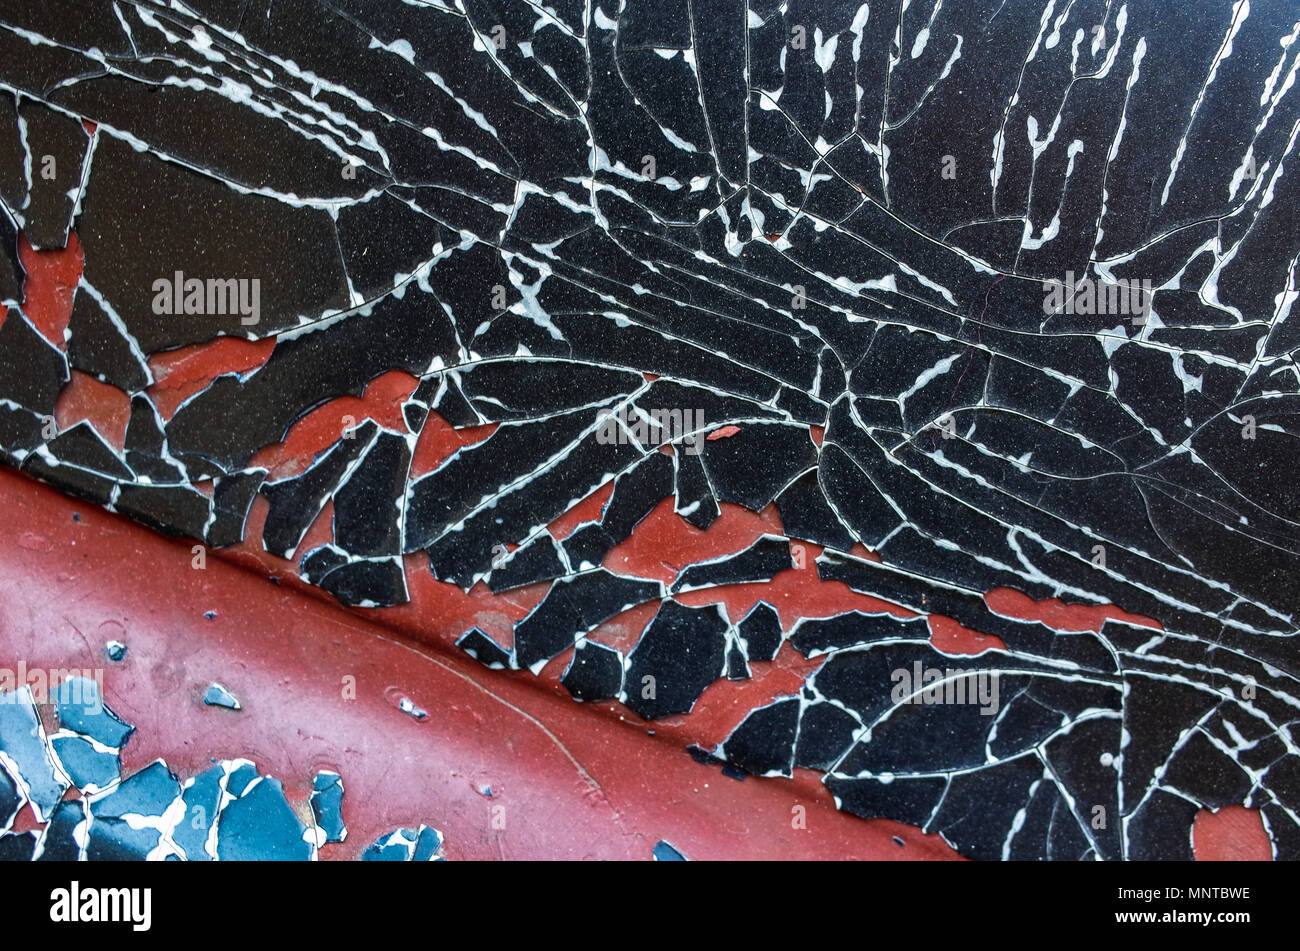 Cracked black paint on a vintage Bentley car, showing the red undercoat paint, London UK Stock Photo